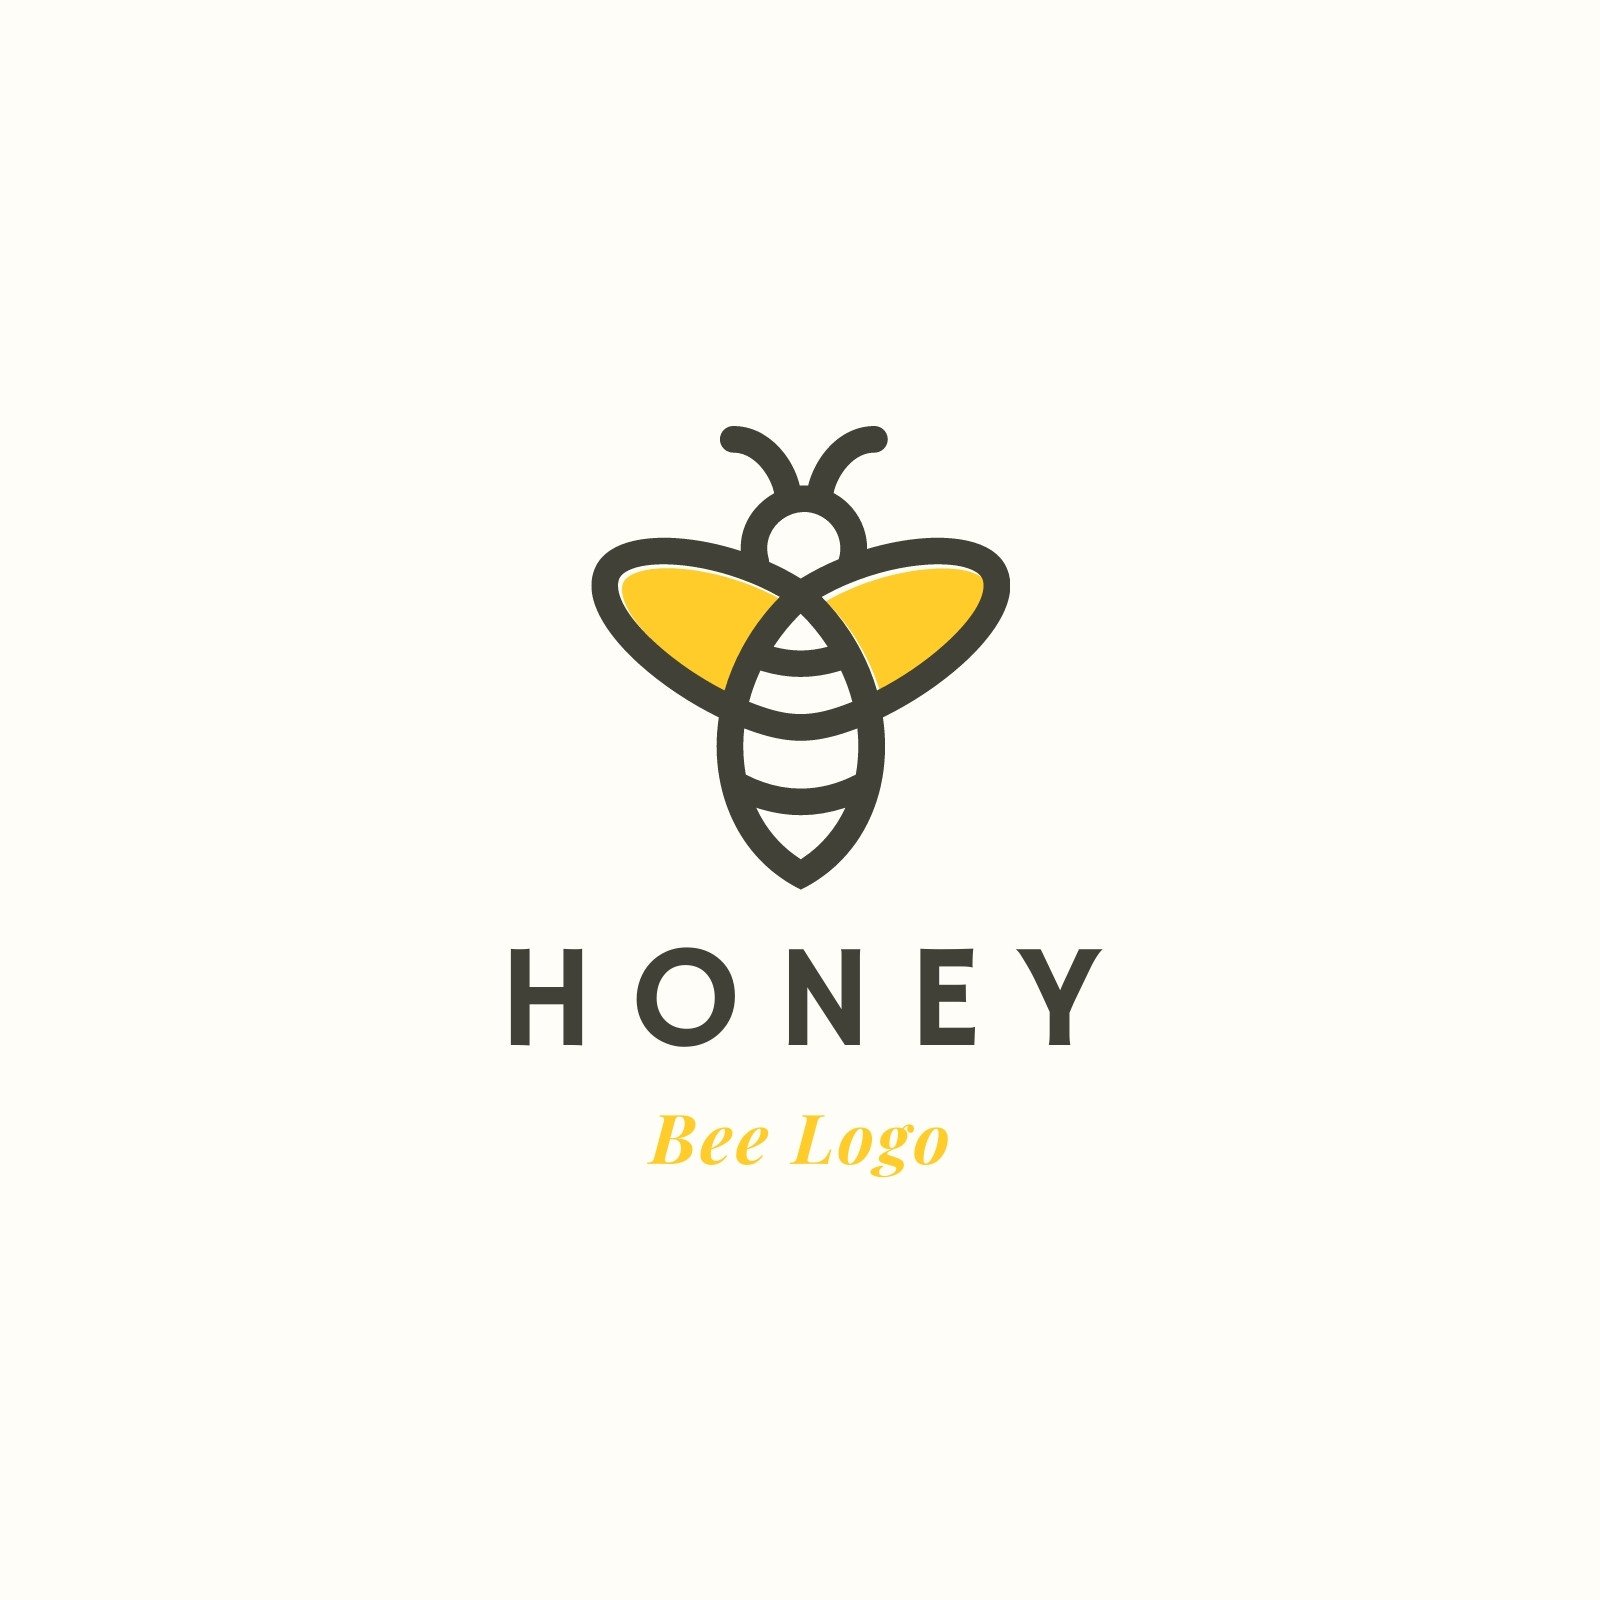 Free to edit and print bee logo templates